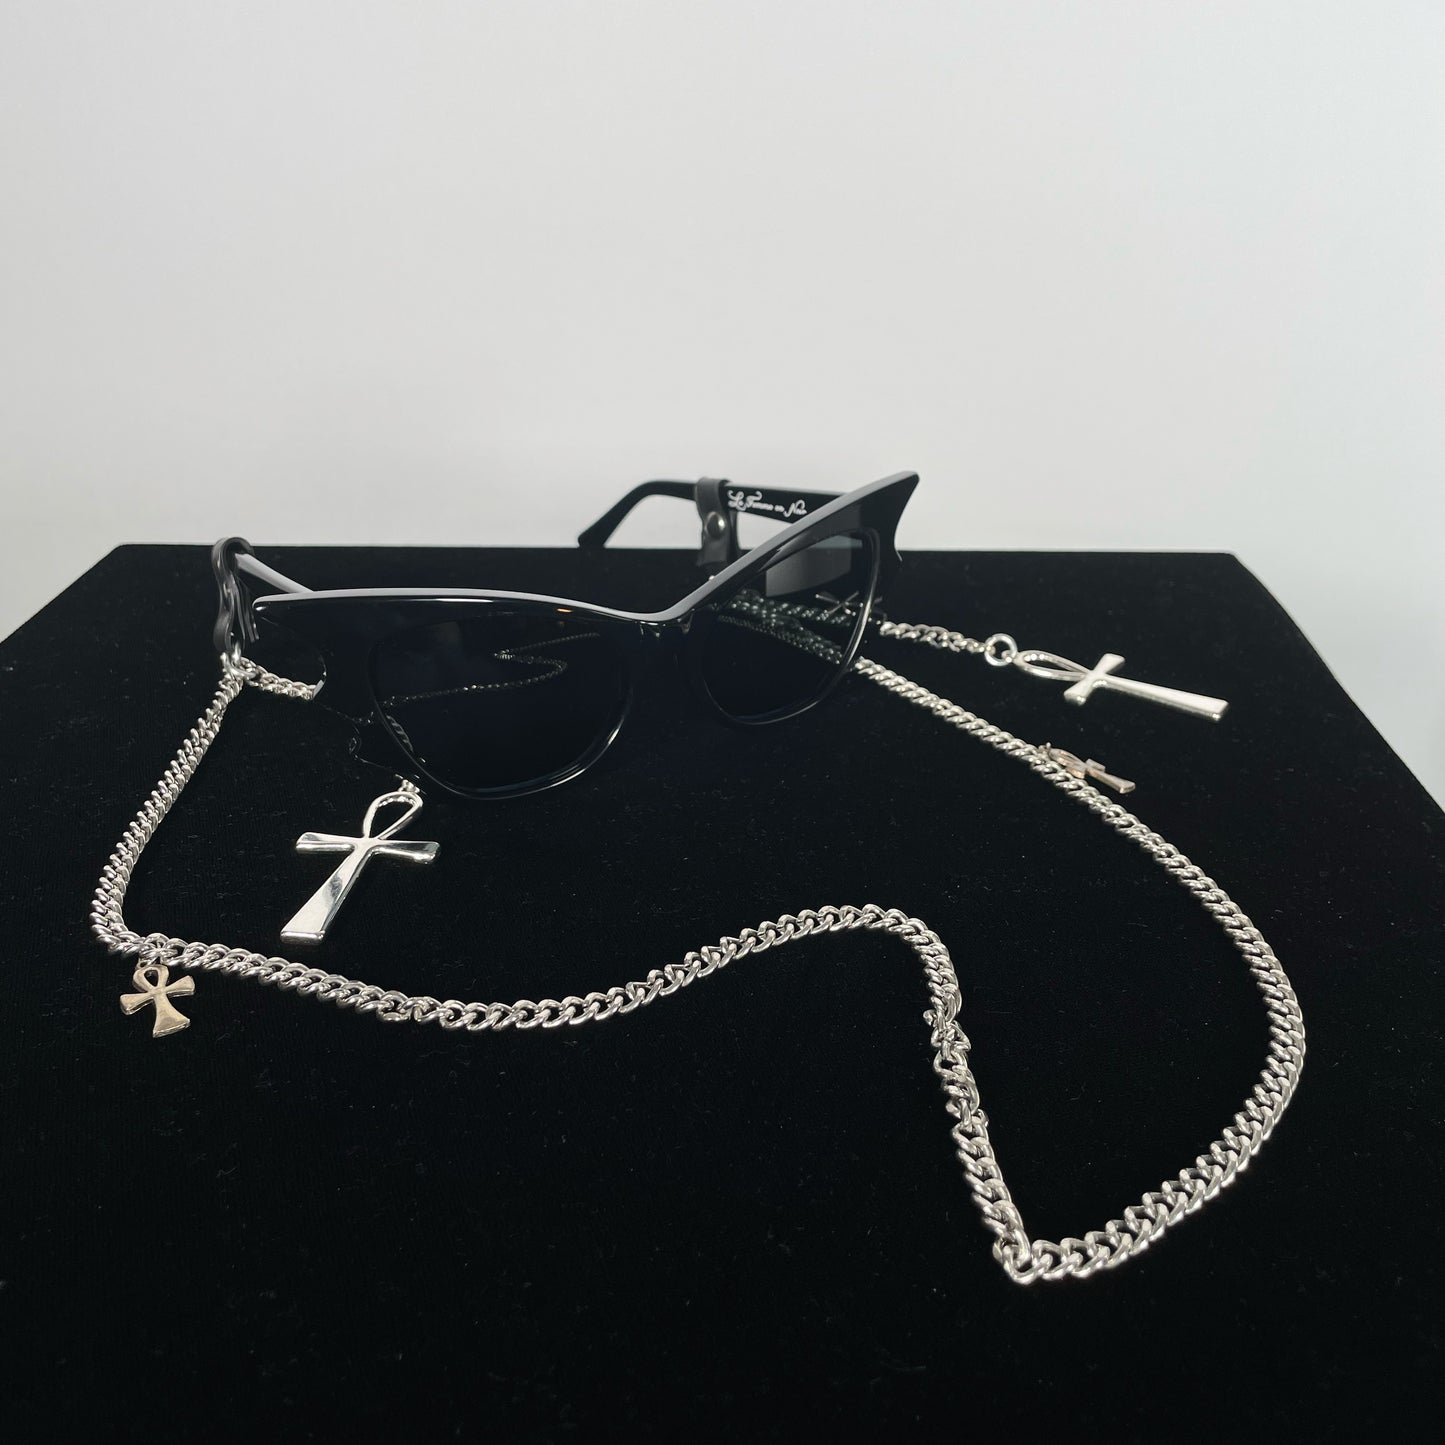 The Occultist Eyeglass Necklace Chain